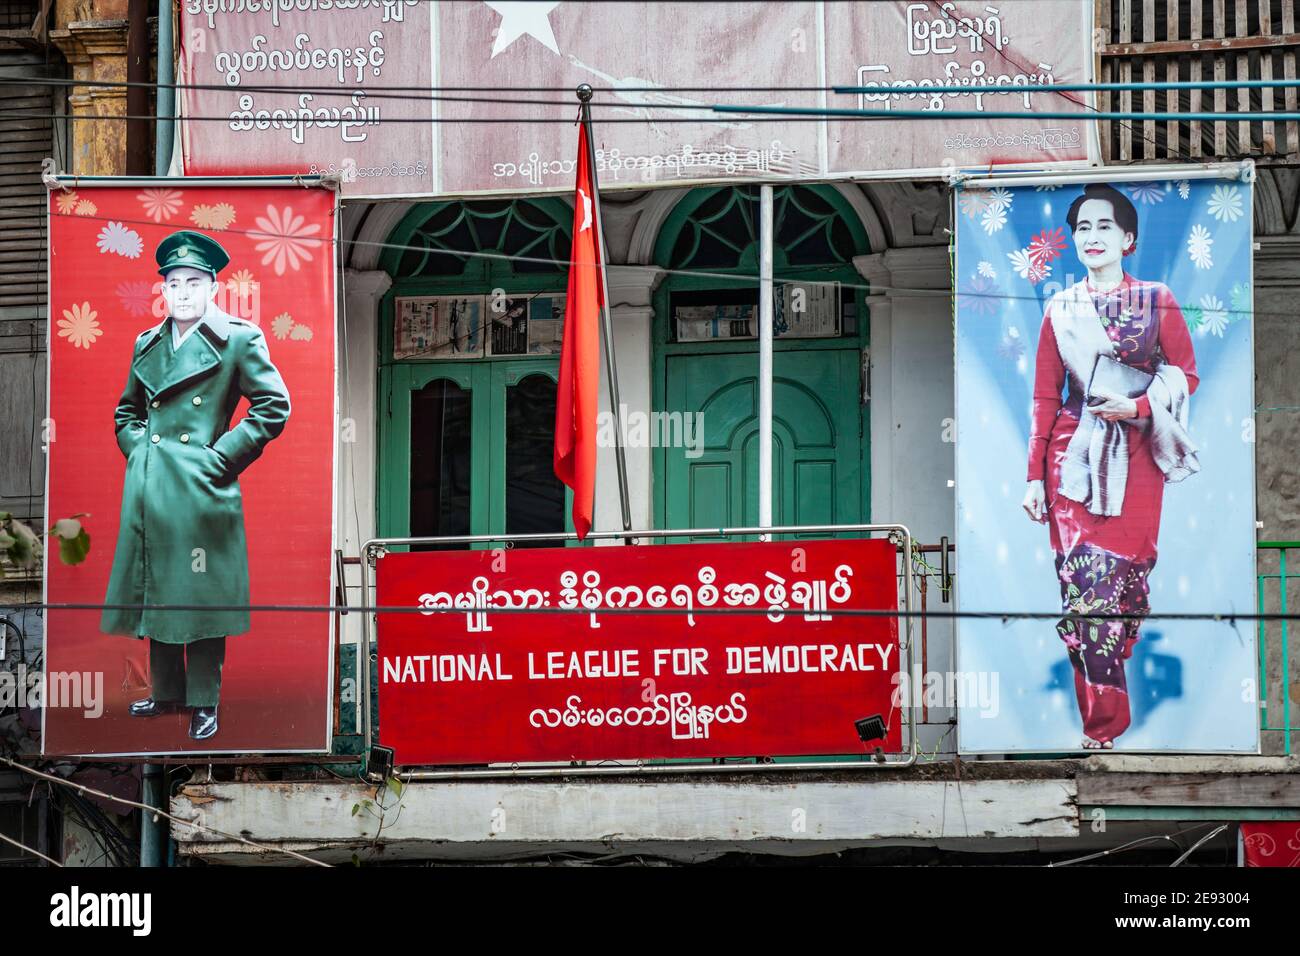 YANGON, MYANMAR - JANUARY 2, 2016: Office of the National League for Democracy with portraits of Aung San and Aung San Suu Kyi in Yangon, Myanmar. Stock Photo